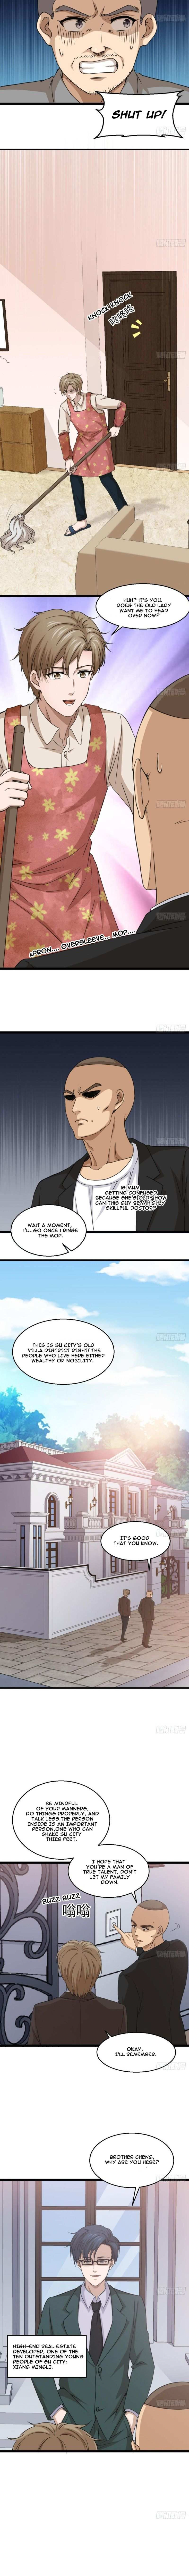 Capital’s most crazy doctor Chapter 8 - page 4